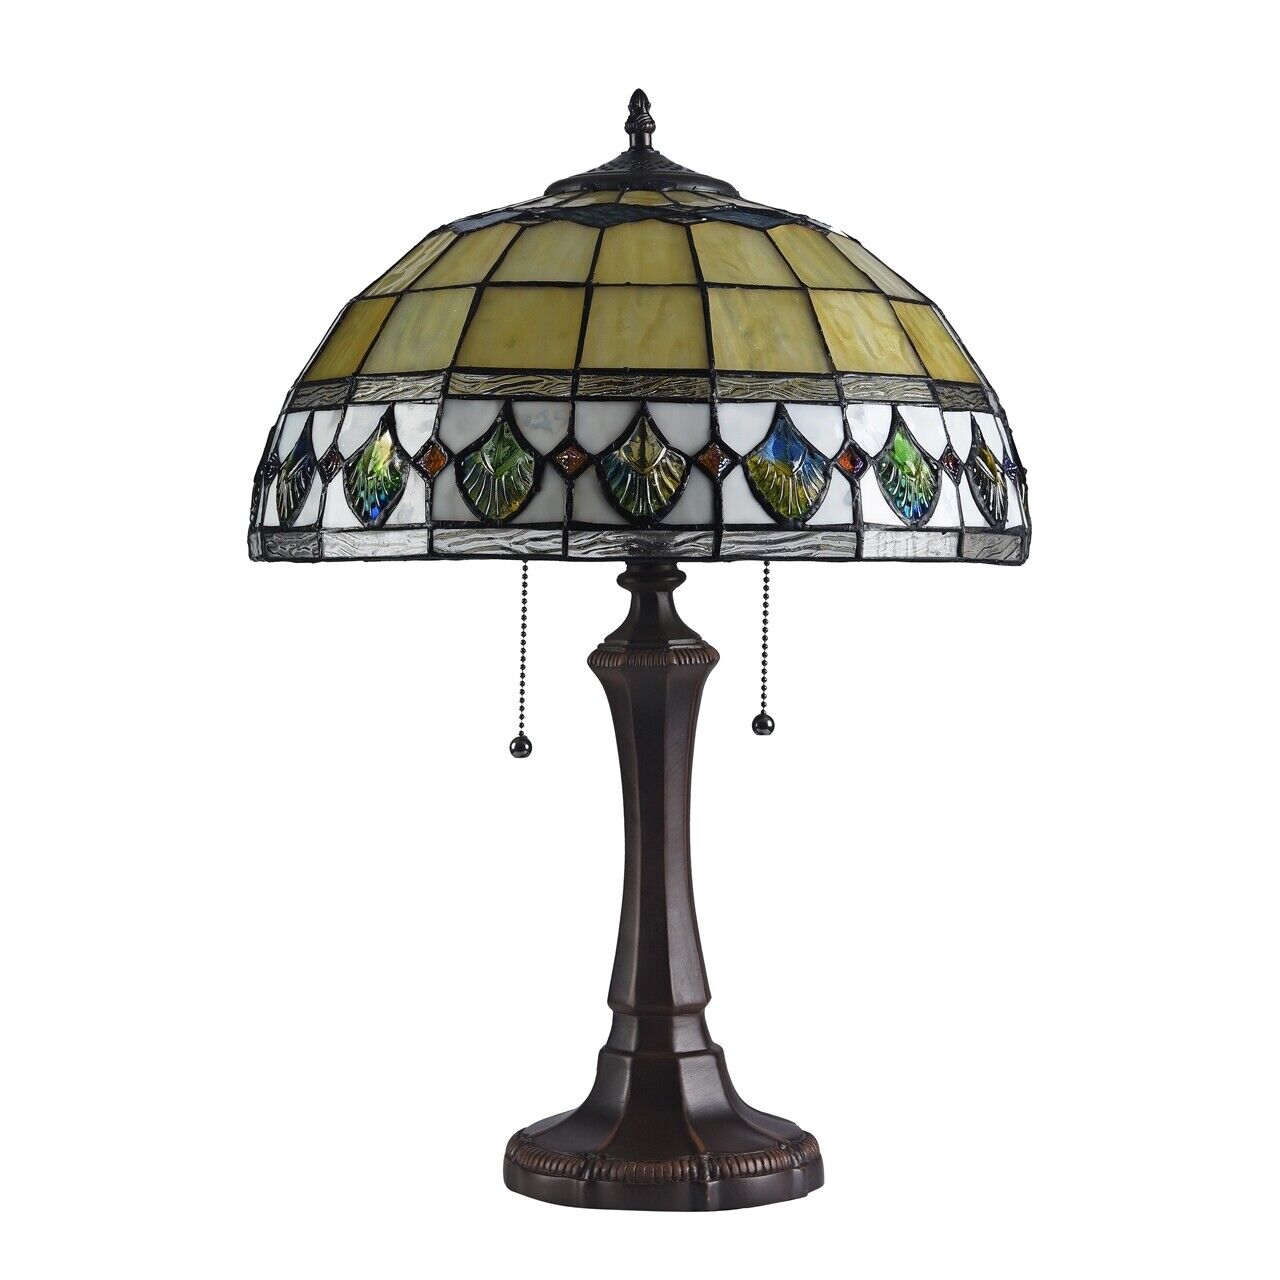 21.85" Antique Vintage Style Stained Glass Table Lamp